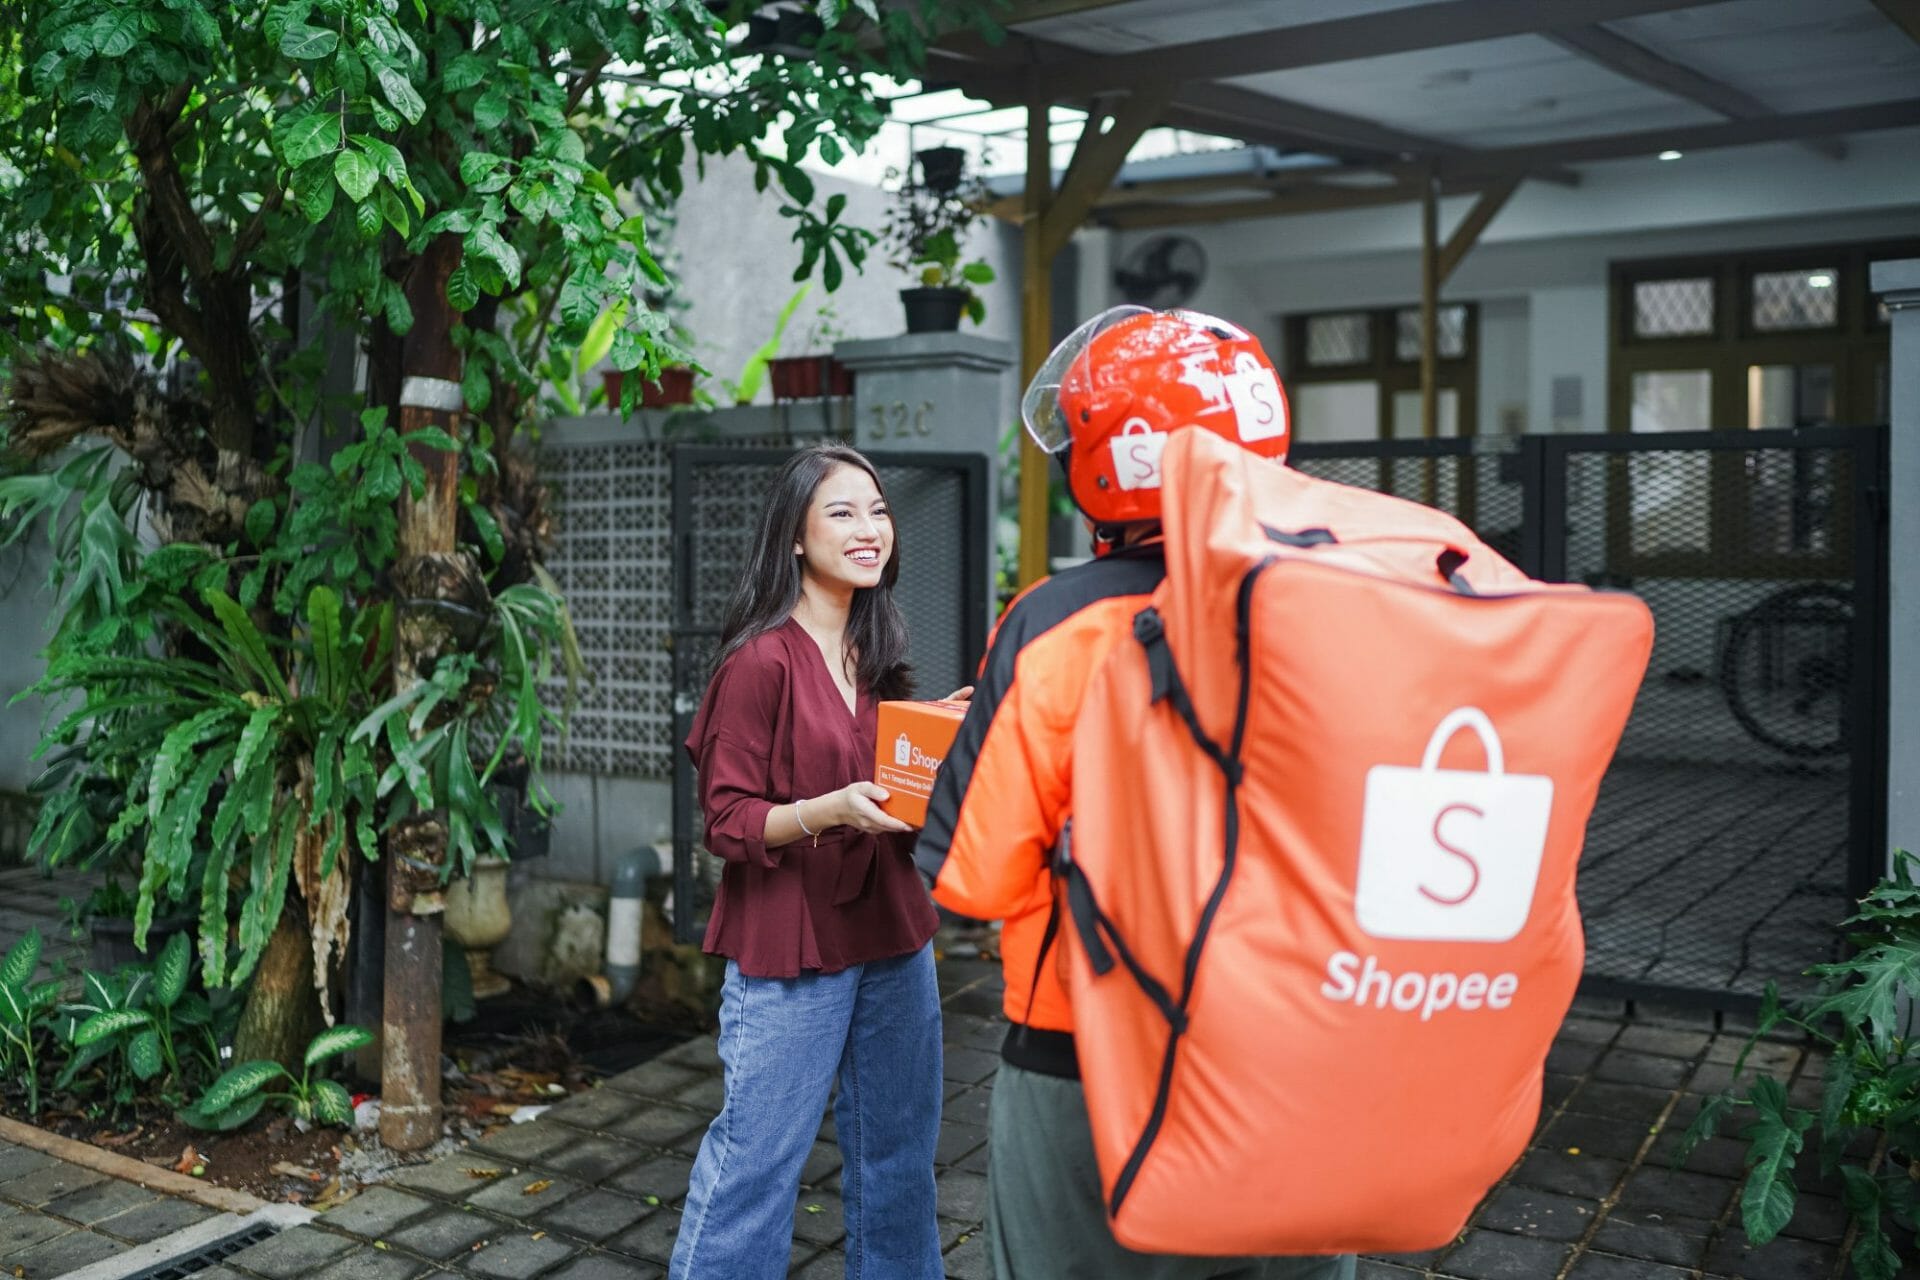 145,000 Shopee Sellers Achieved 25% Growth in Sales - BusinessToday